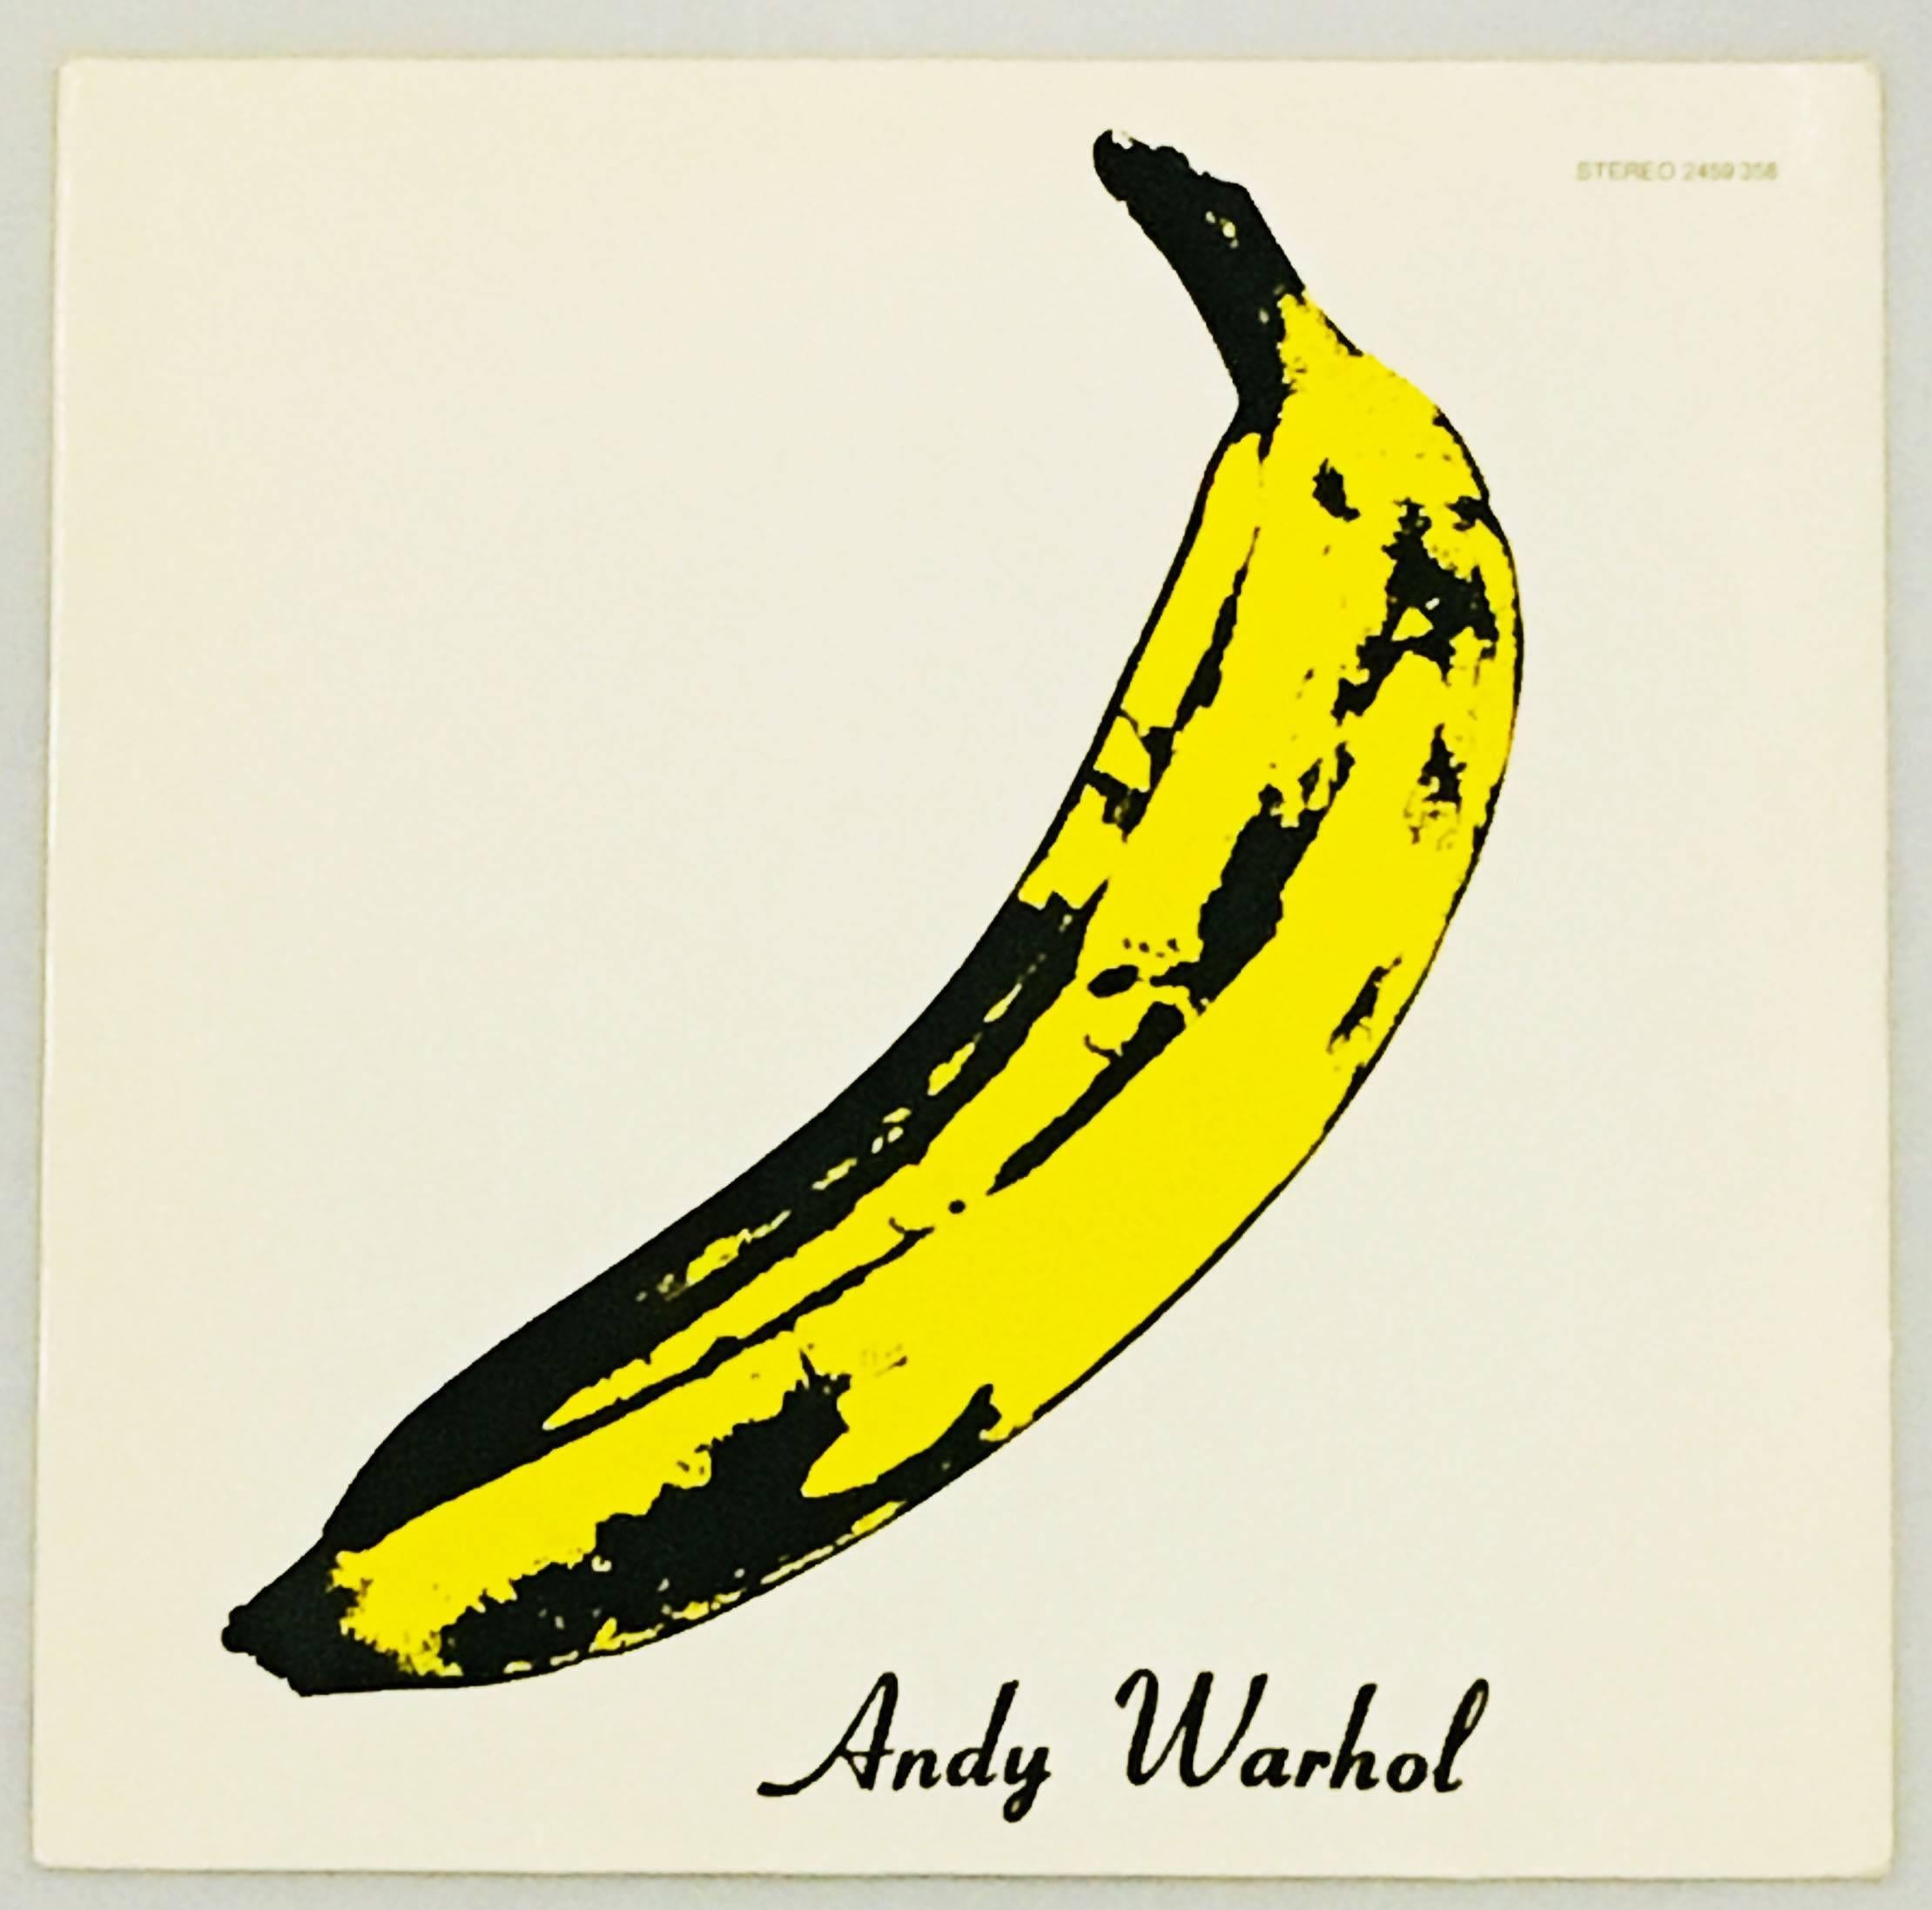 The Velvet Underground & Nico Vinyl Record, Europe circa early 1980's. Original Record Cover Art by Andy Warhol. Excellent condition. Looks very cool framed. 

Medium: Off Set Lithograph on record sleeve
Dimensions: 12 x 12 inches (30.48 x 30.48